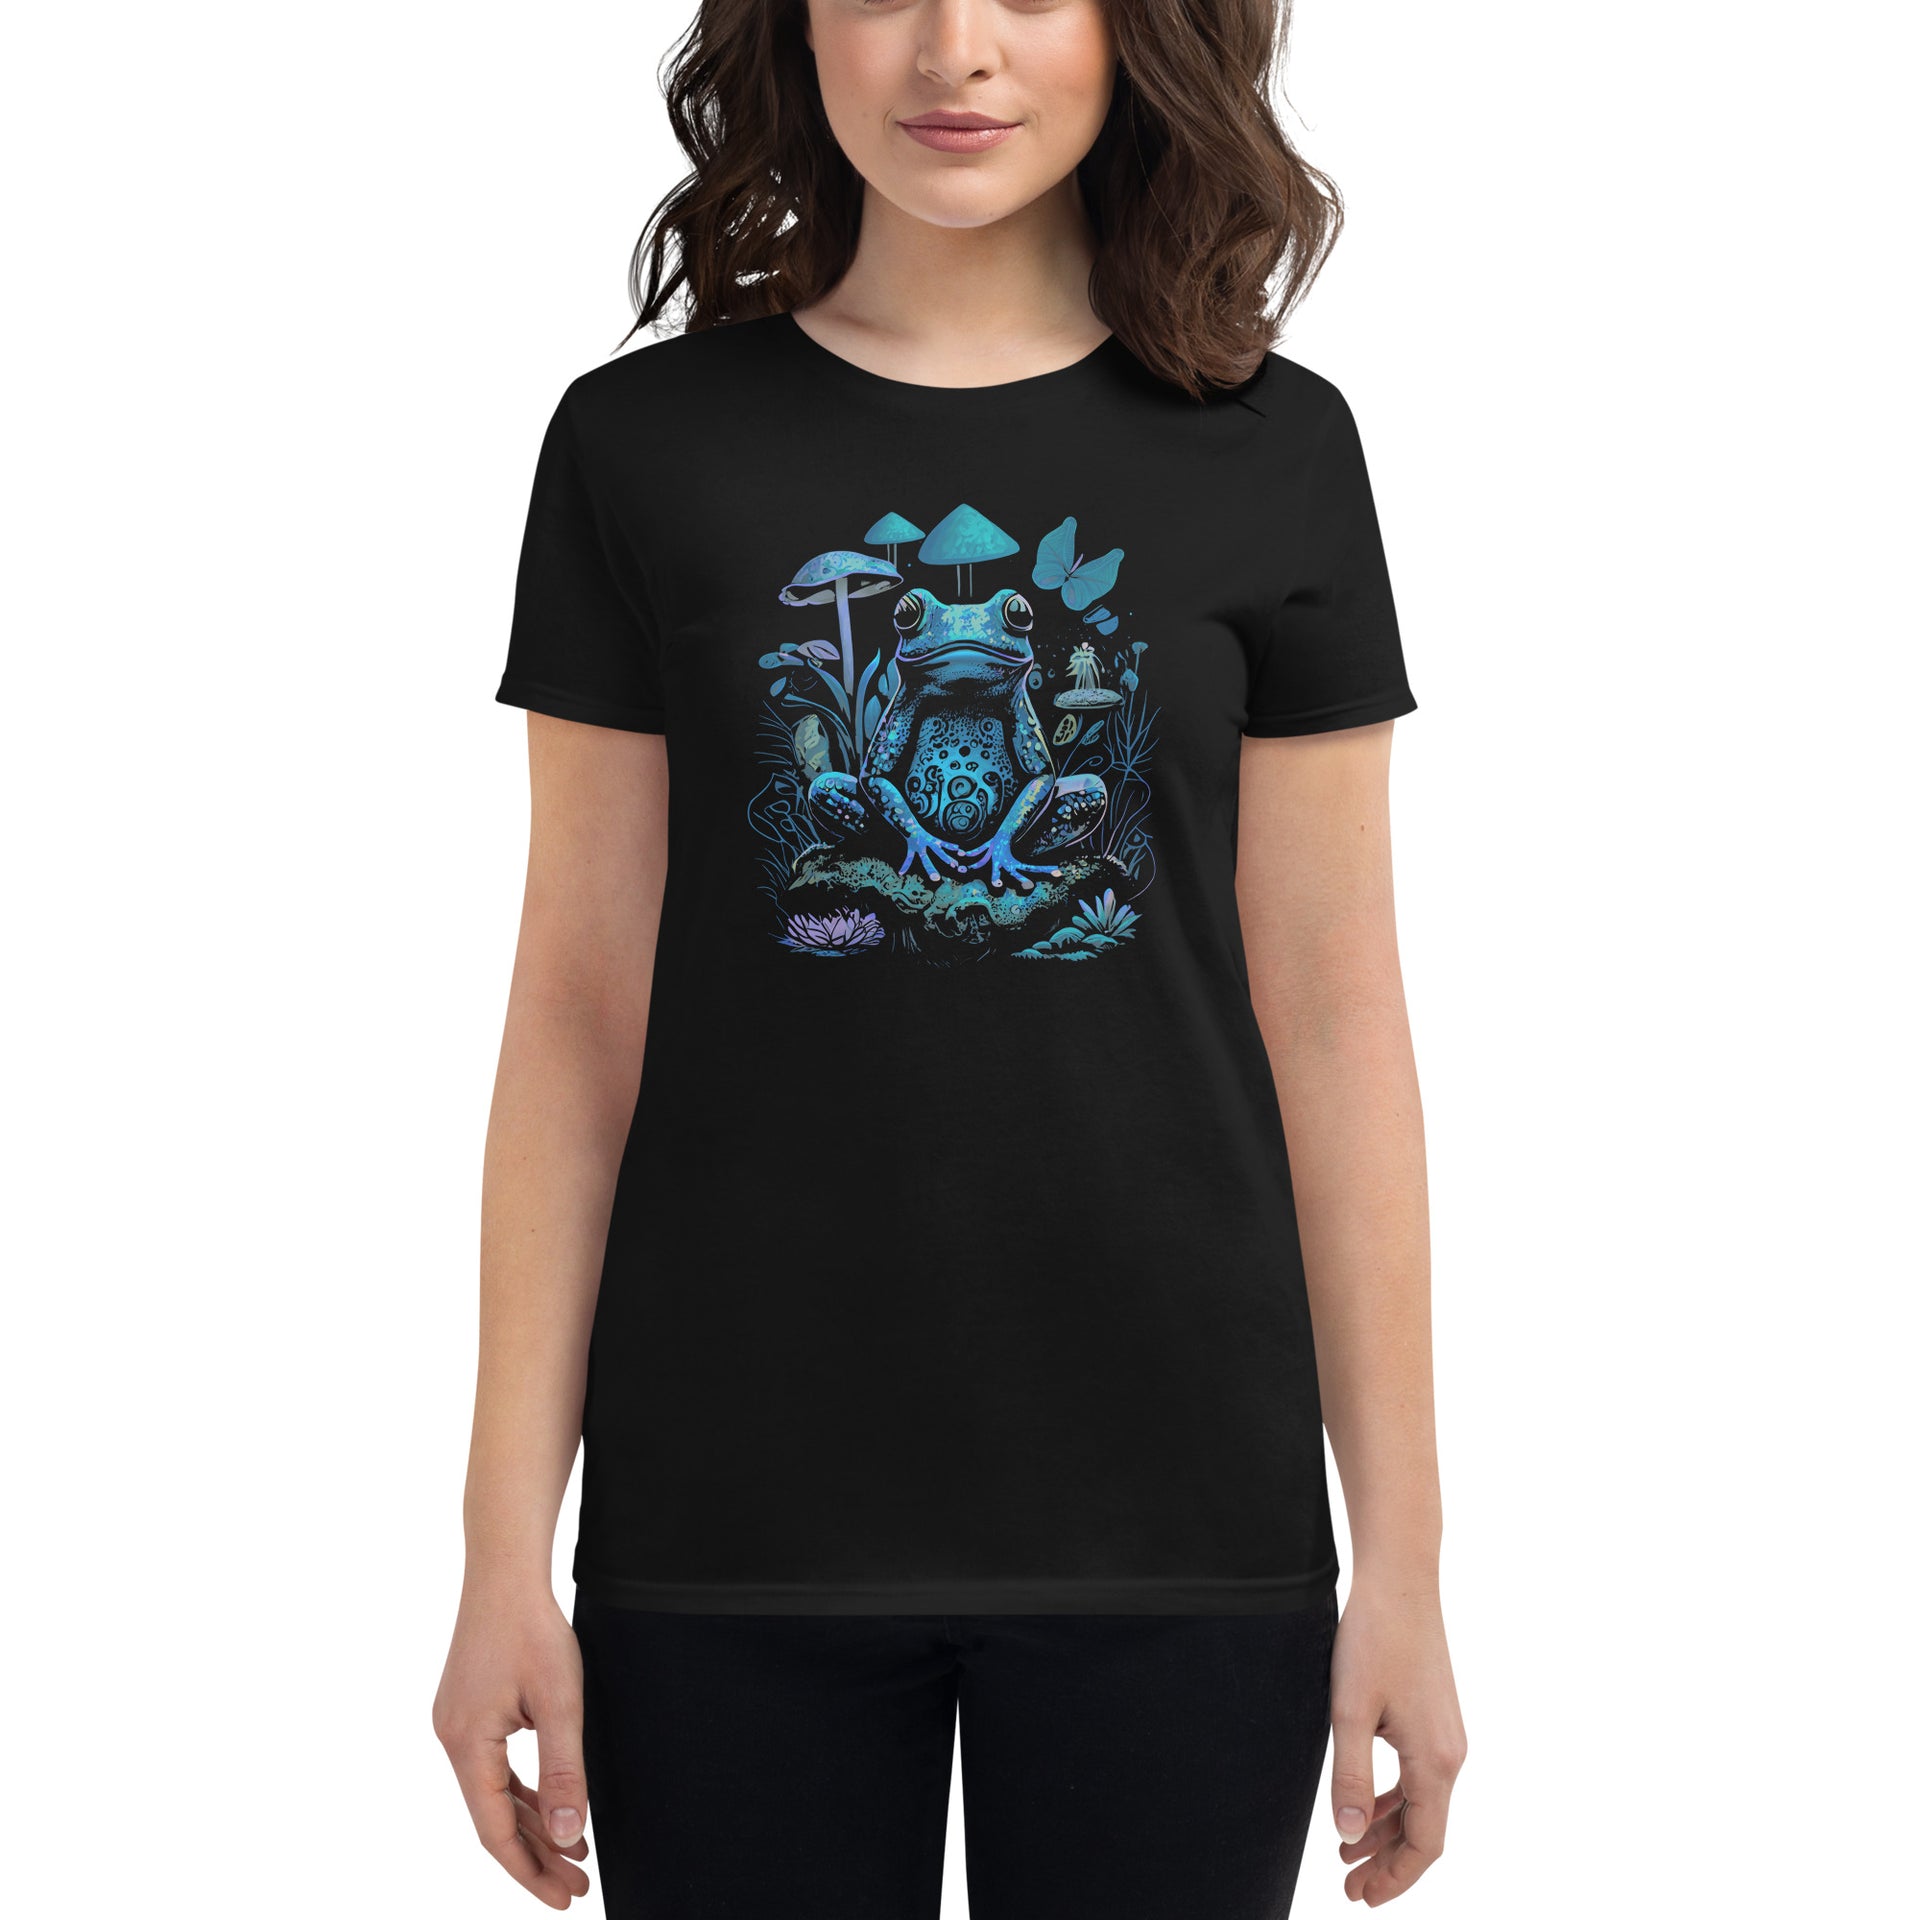 Trippy Frog And Mushrooms Women's T-Shirt